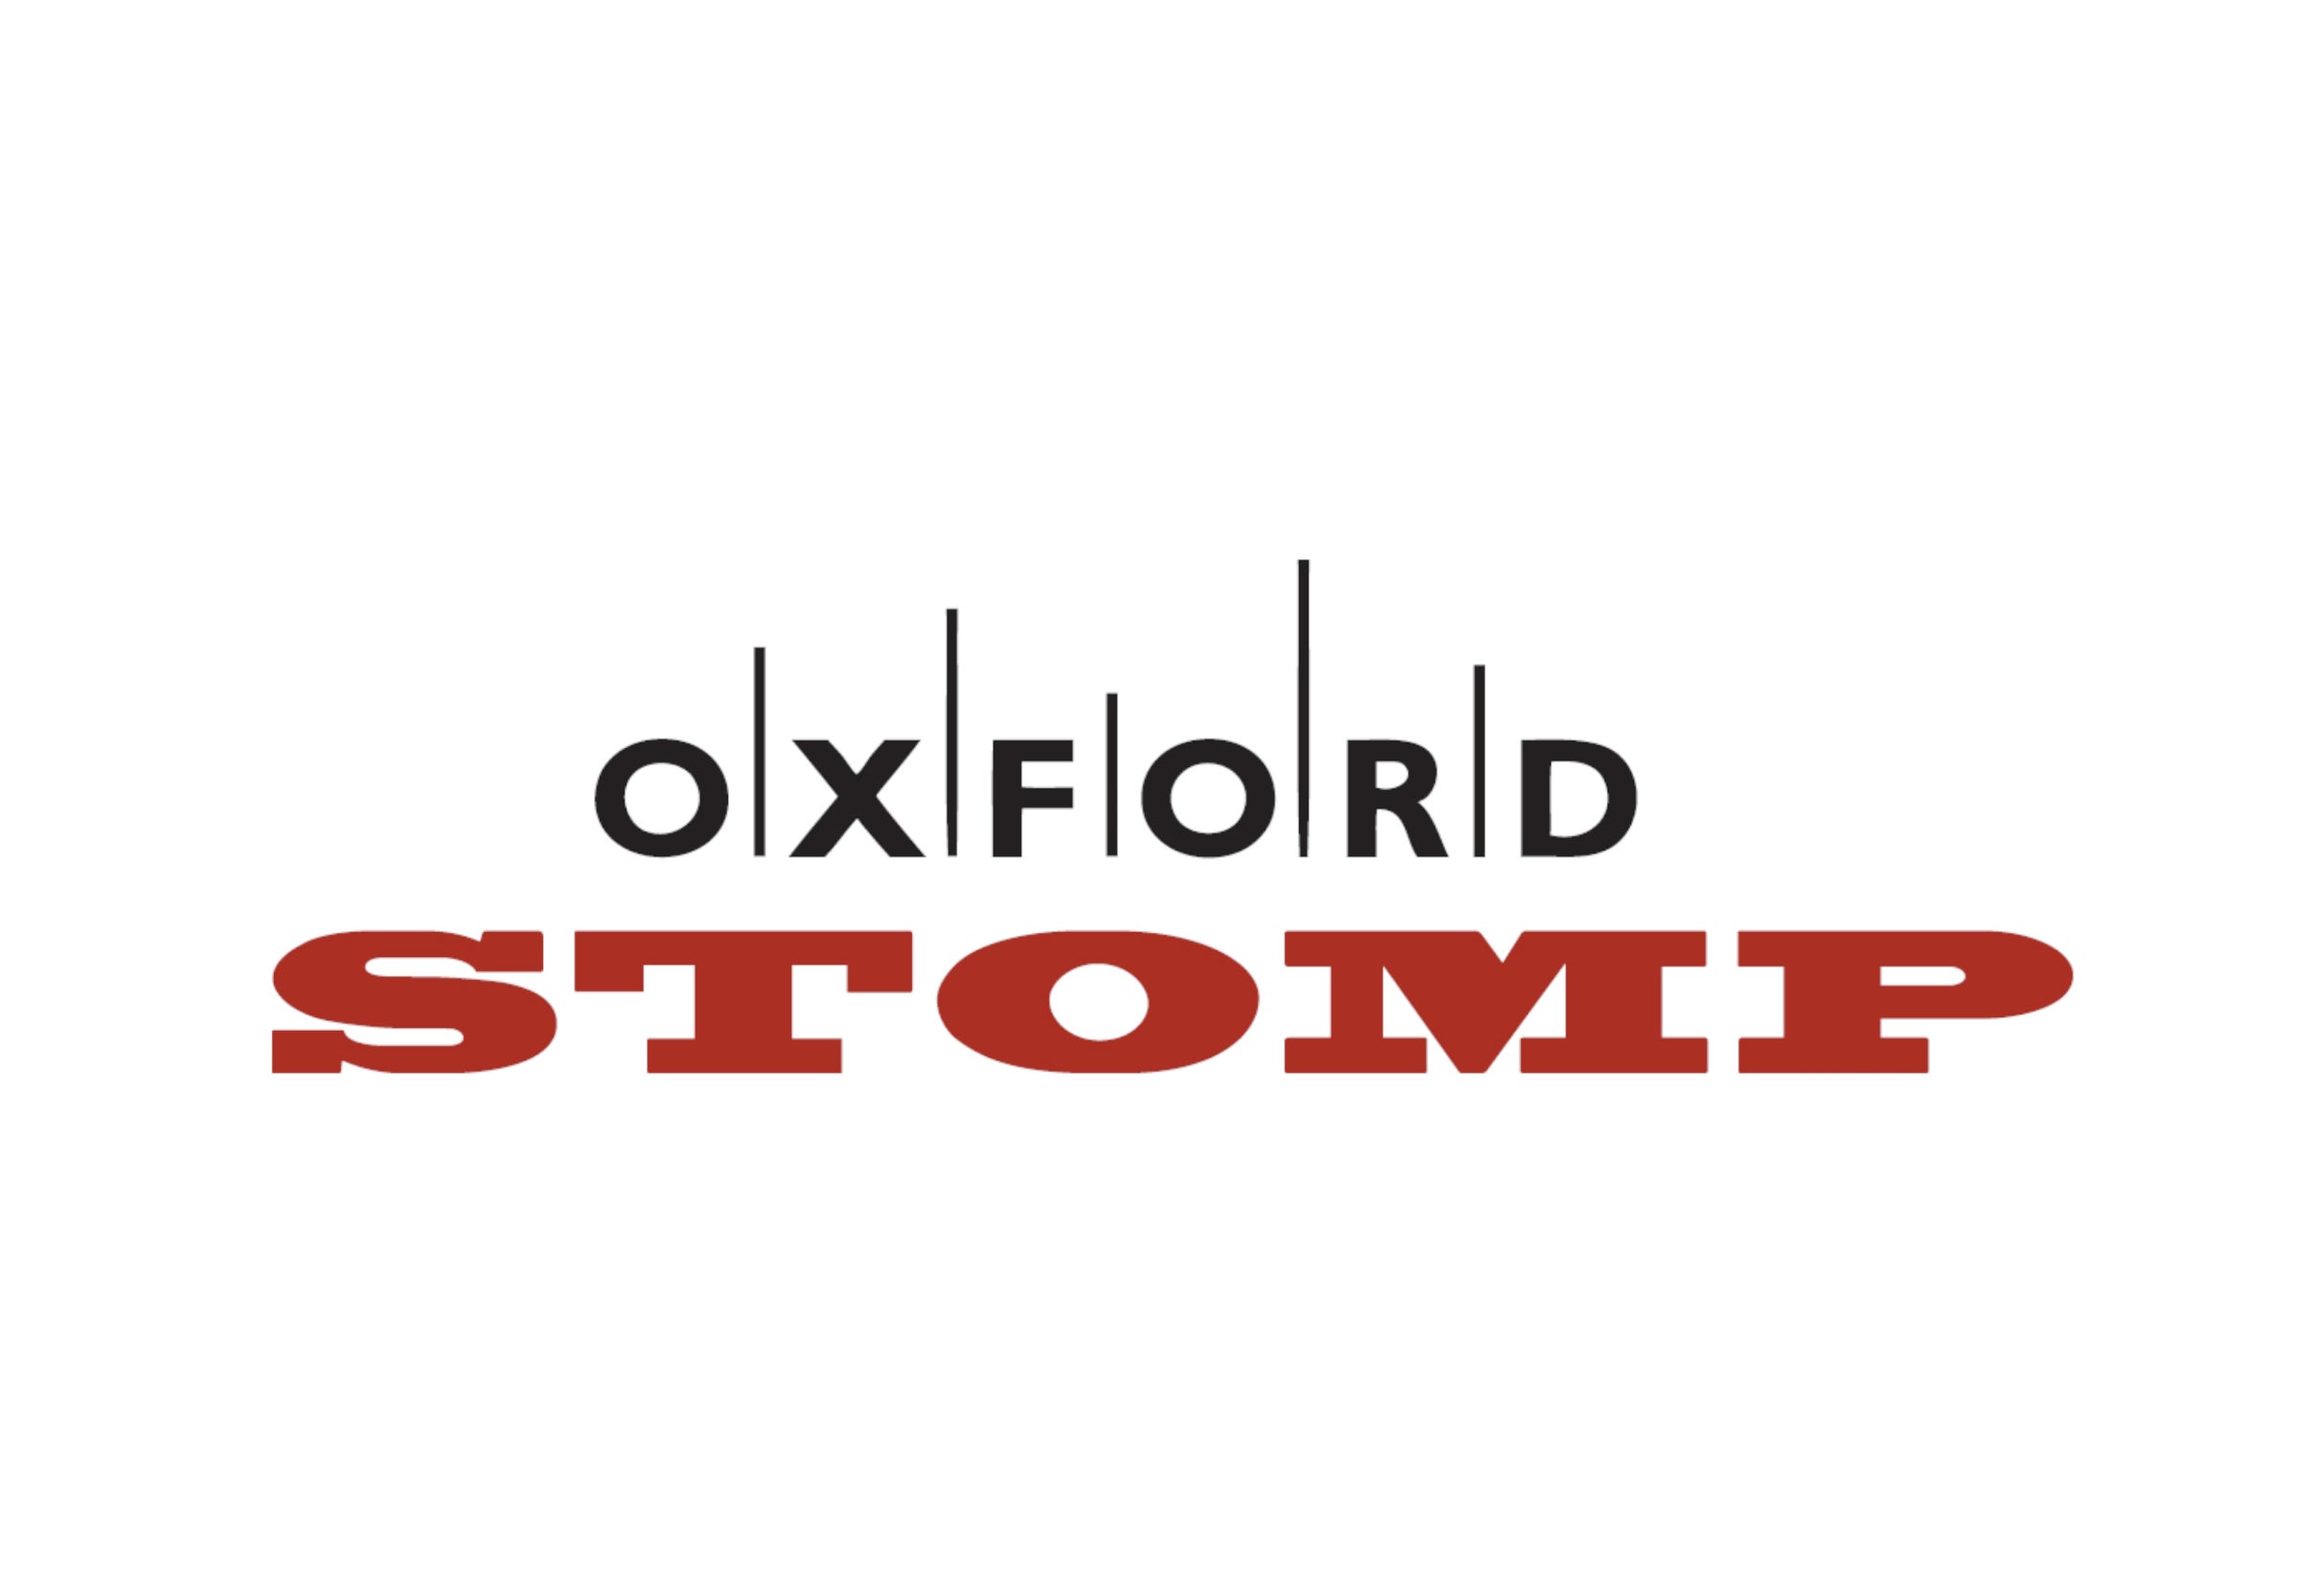 Oxford Stomp pre-sale code for concert tickets in Calgary, AB (Prince's Island Park)